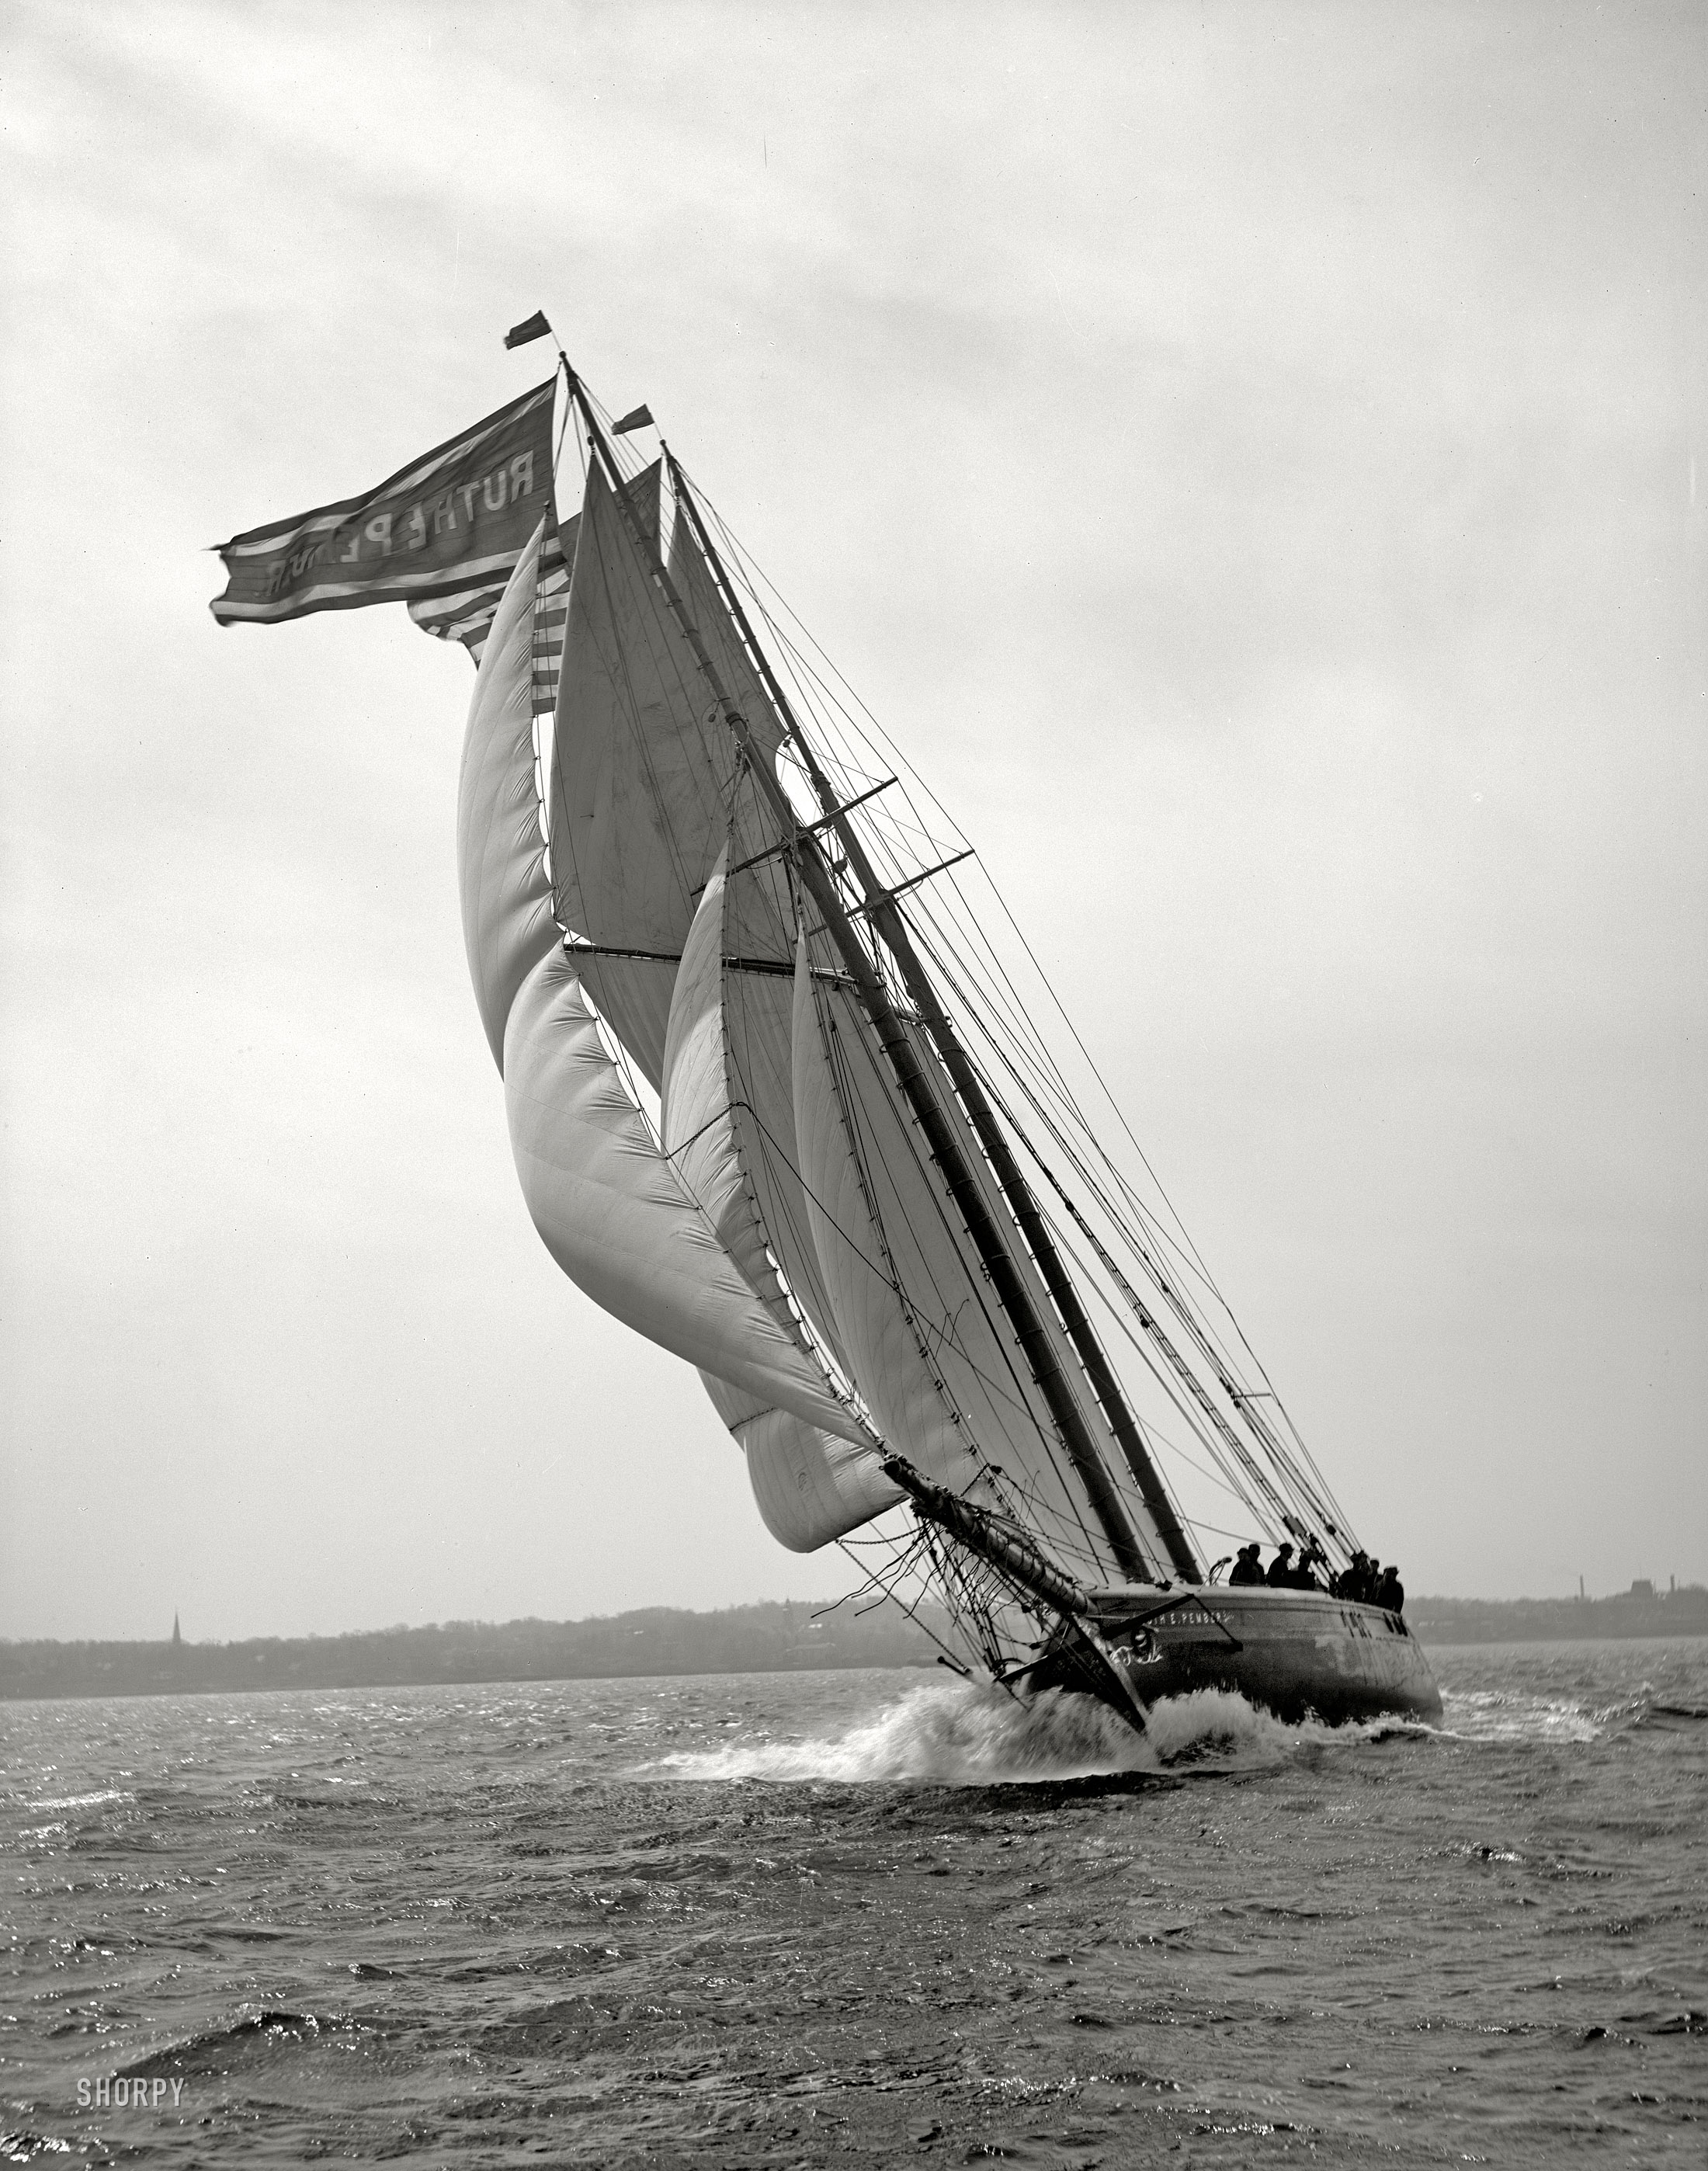 Circa 1901. "Ruth. E Pember at sail." 8x10 inch dry plate glass negative, Detroit Publishing Company. View full size.